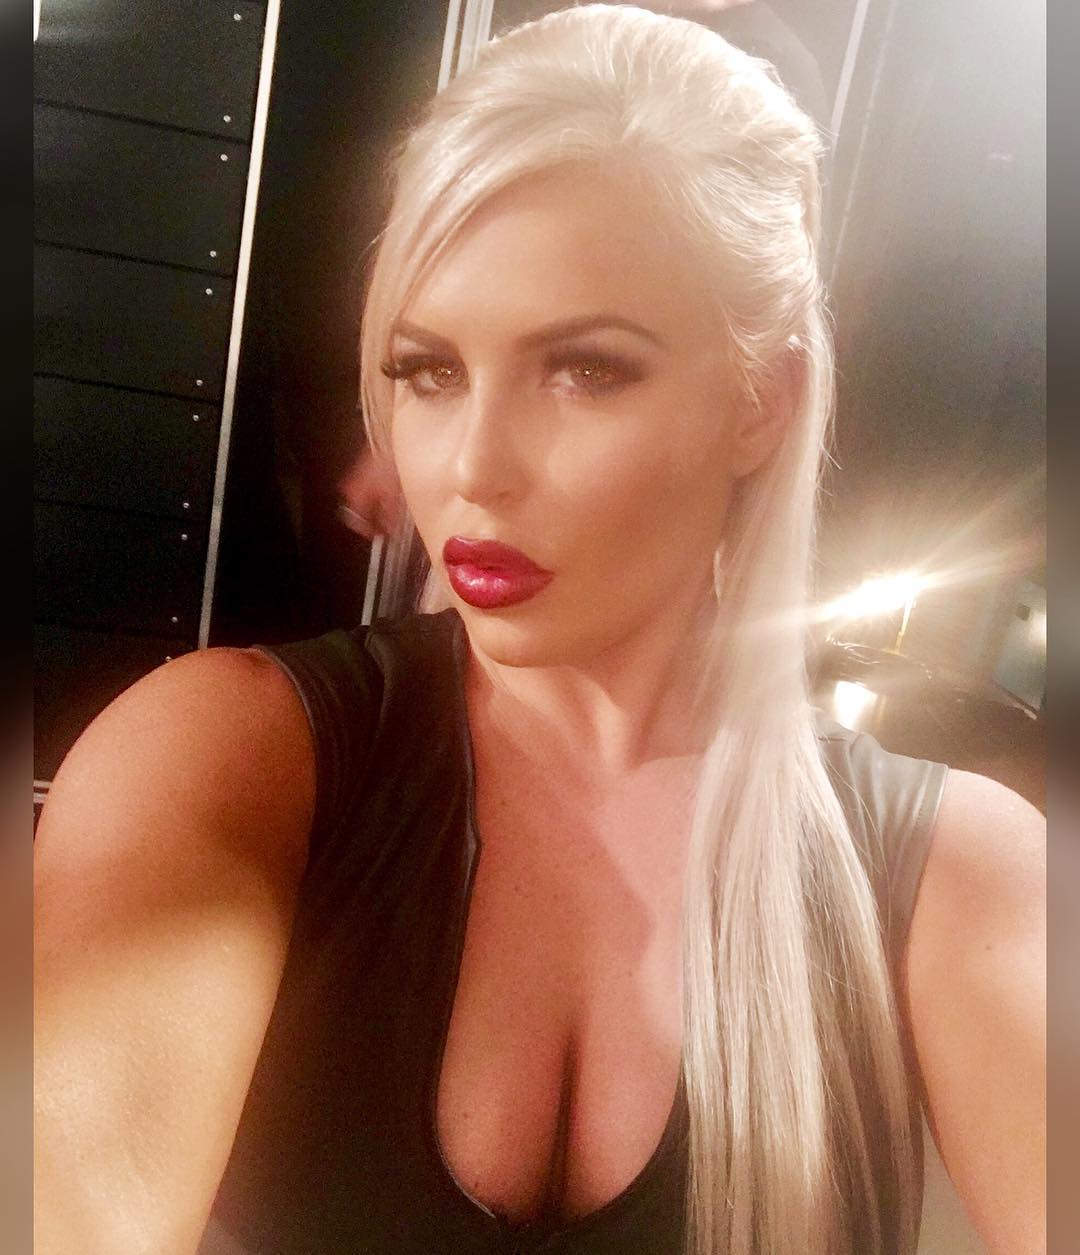 75+ Hot Pictures Of Dana Brooke Show Off This WWE Diva’s Sexy Body | Best Of Comic Books